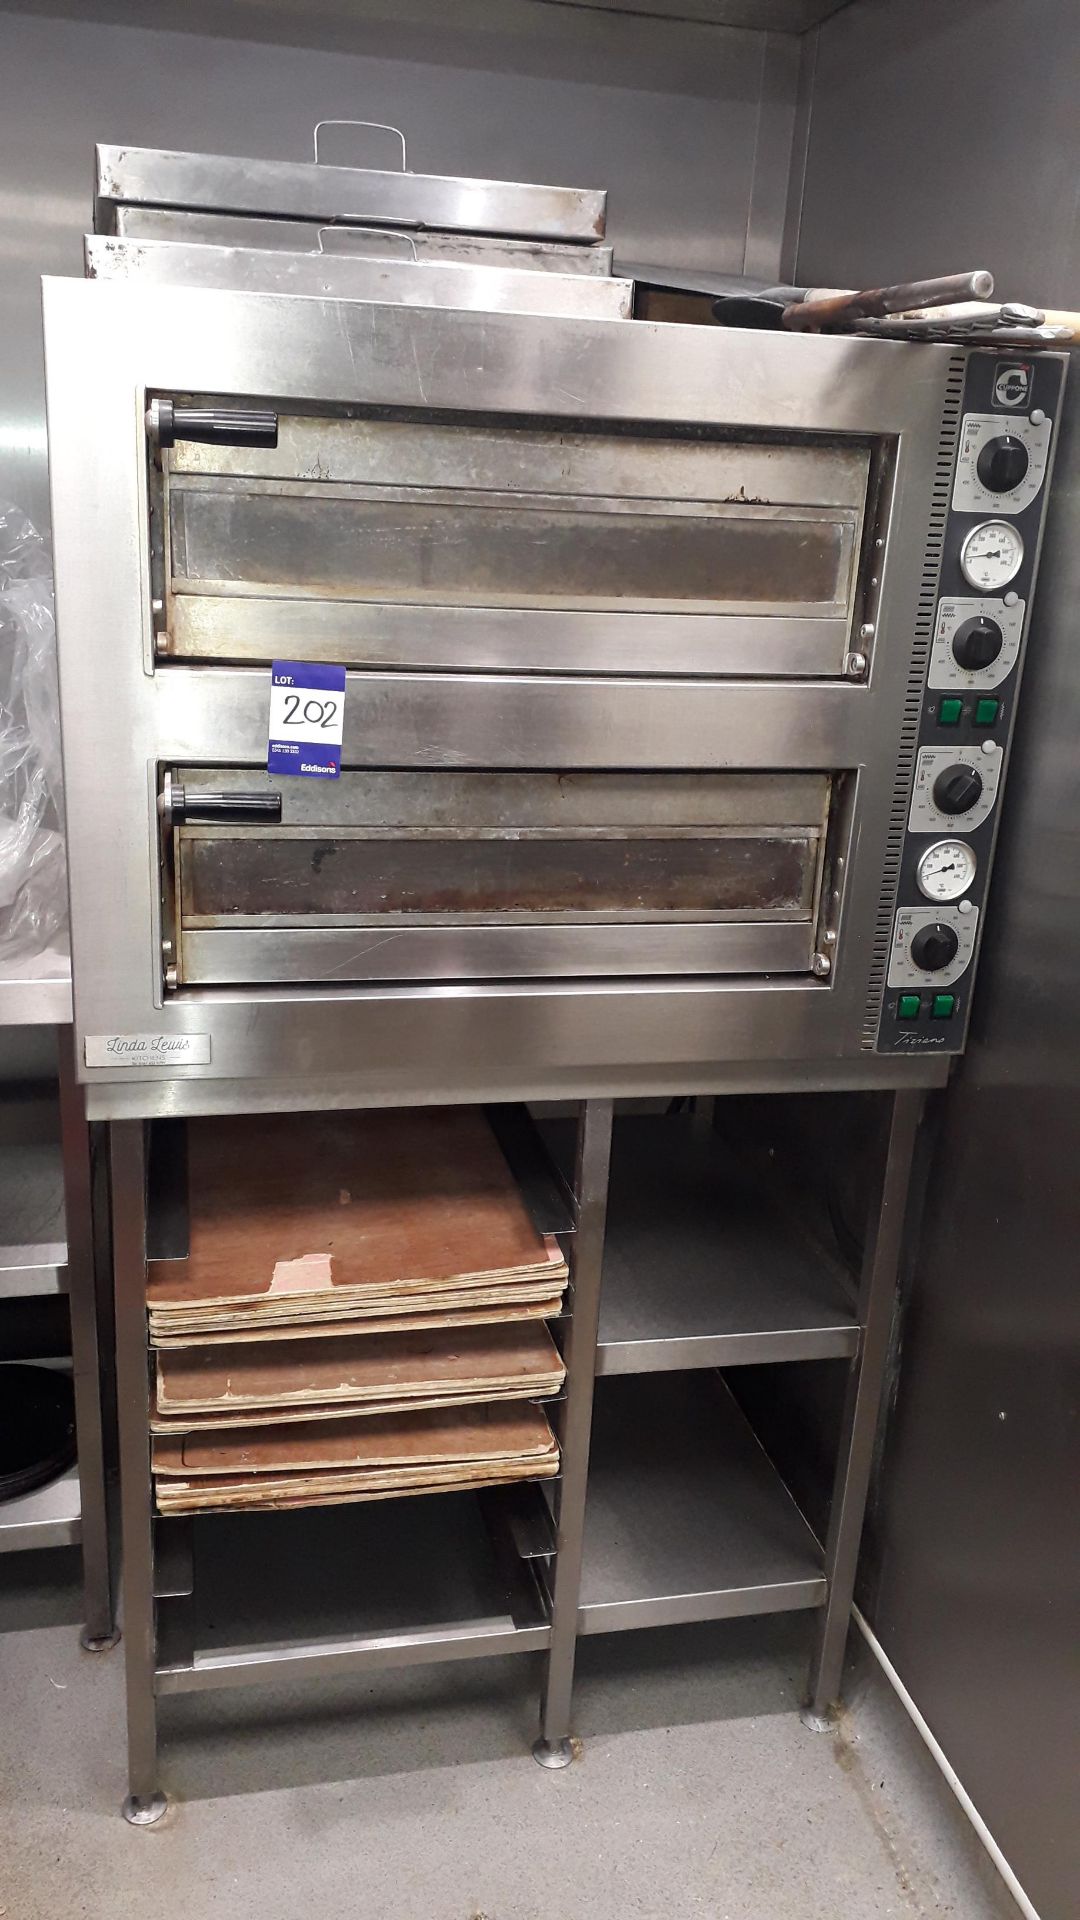 Cuppone Tiziano LLK Stainless Steel Twin Deck Pizza Oven on Stainless Steel Stand 415v, Located at